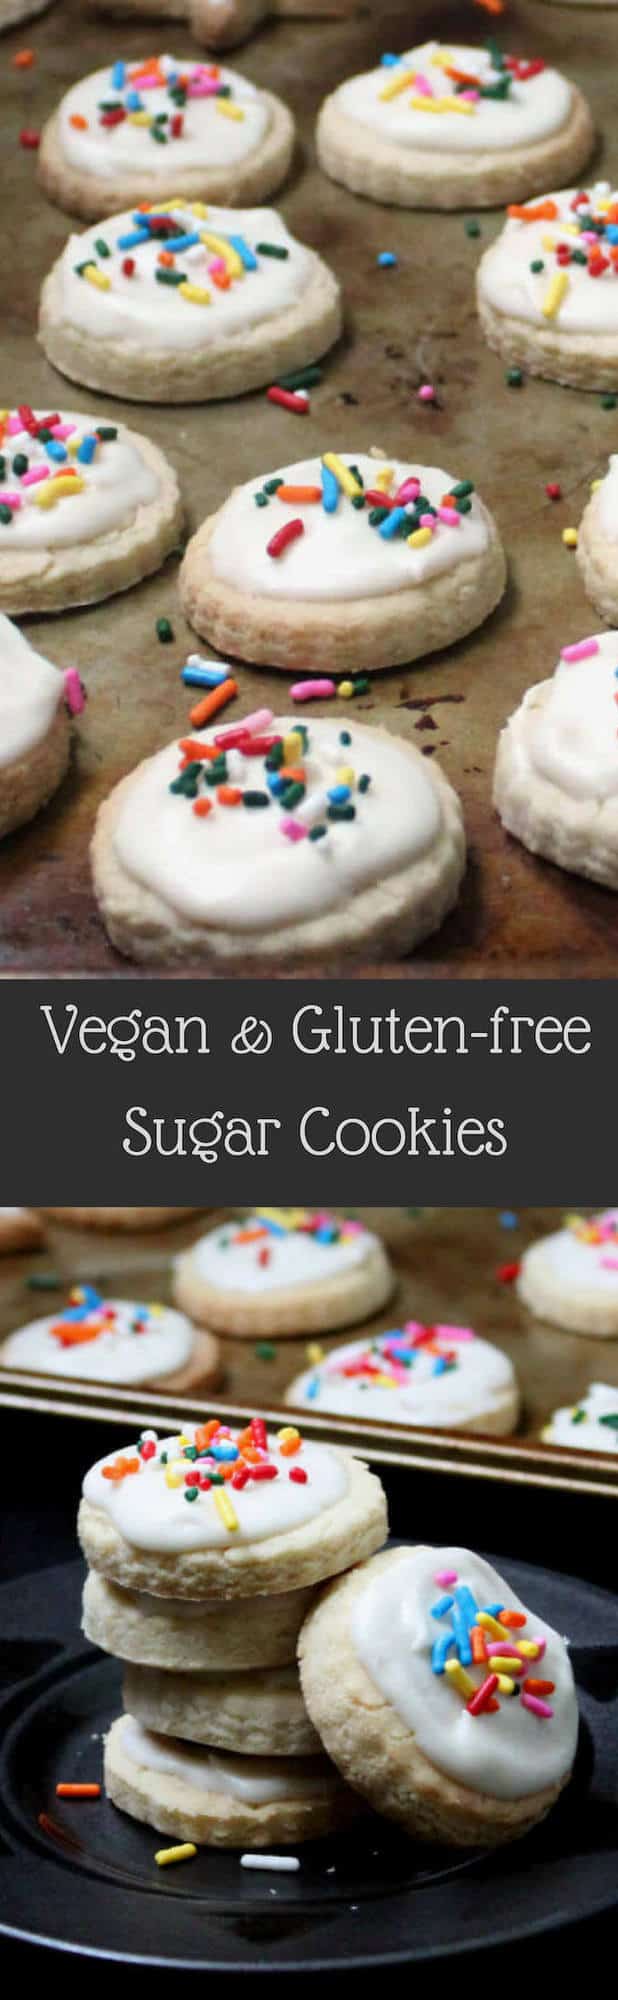 GF vegan sugar cookies images with text inlay that says "vegan and gluten-free sugar cookies"